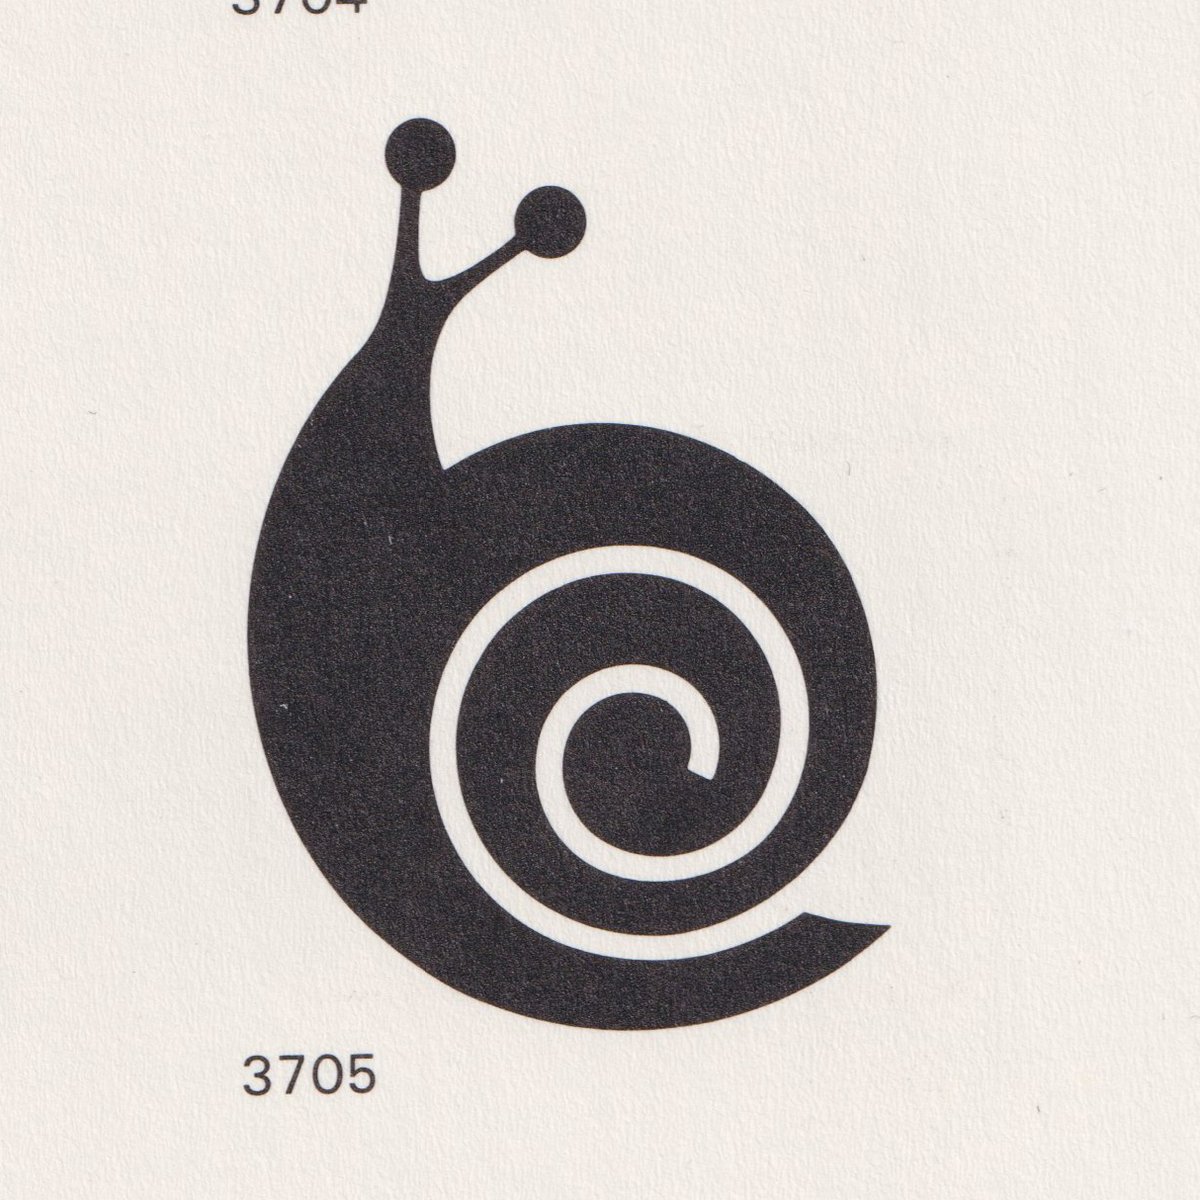 Take logo design slow like a snail... Discover over 4000 more logos at logo-archive.org the internet's largest library of historical logos. #logoarchive